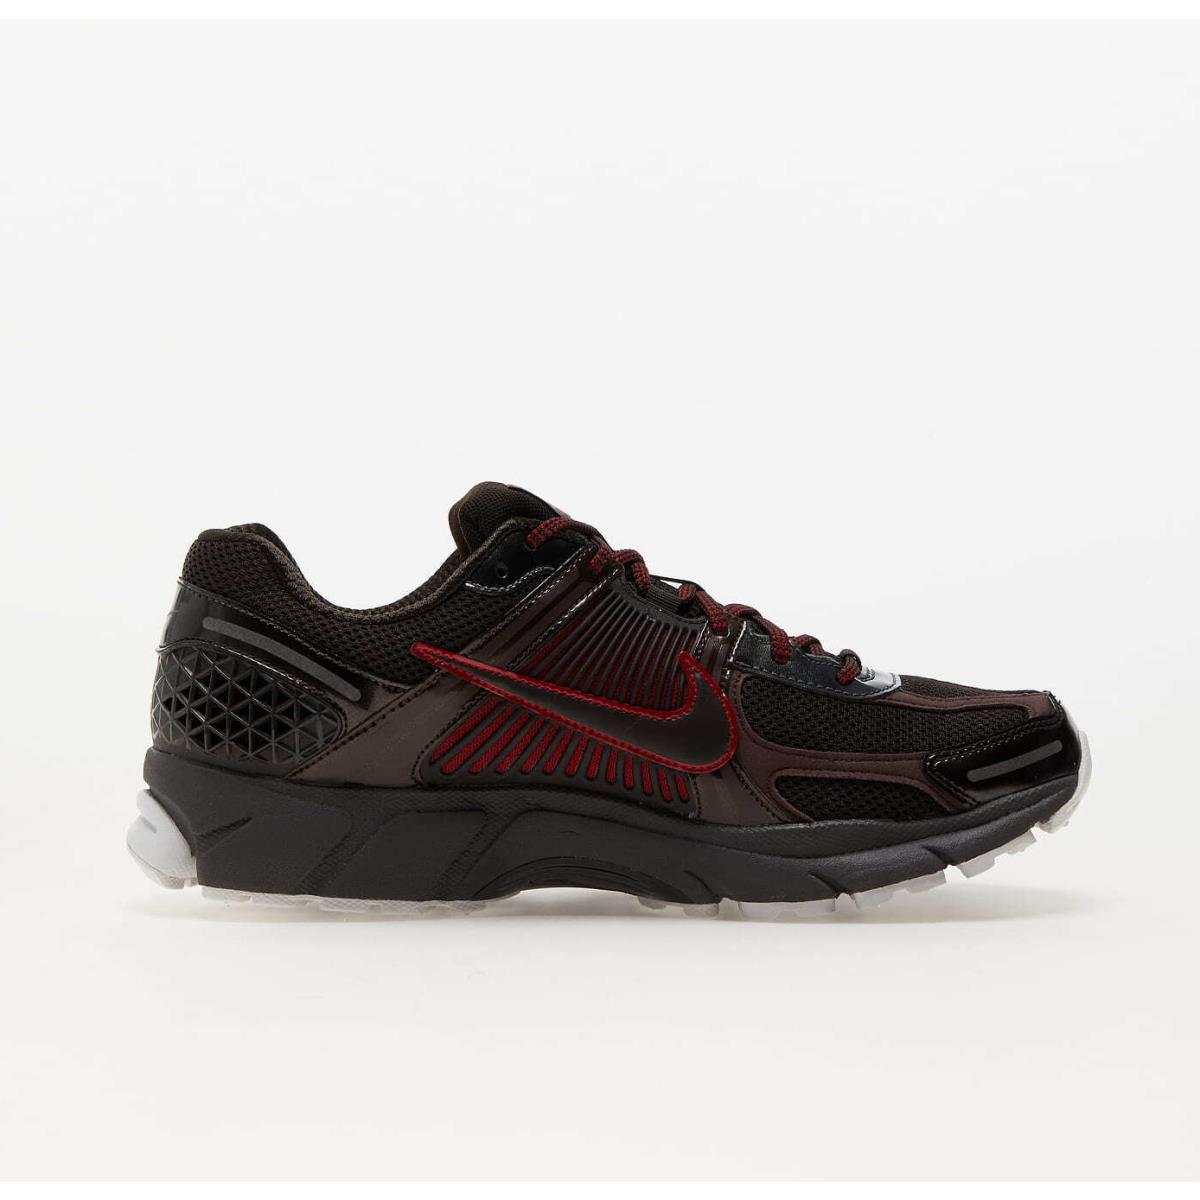 Nike shoes Zoom Vomero - Velvet Brown/ Gym Red-Earth-Anthracite , Velvet Brown/ Gym Red-Earth-Anthracite Manufacturer 2